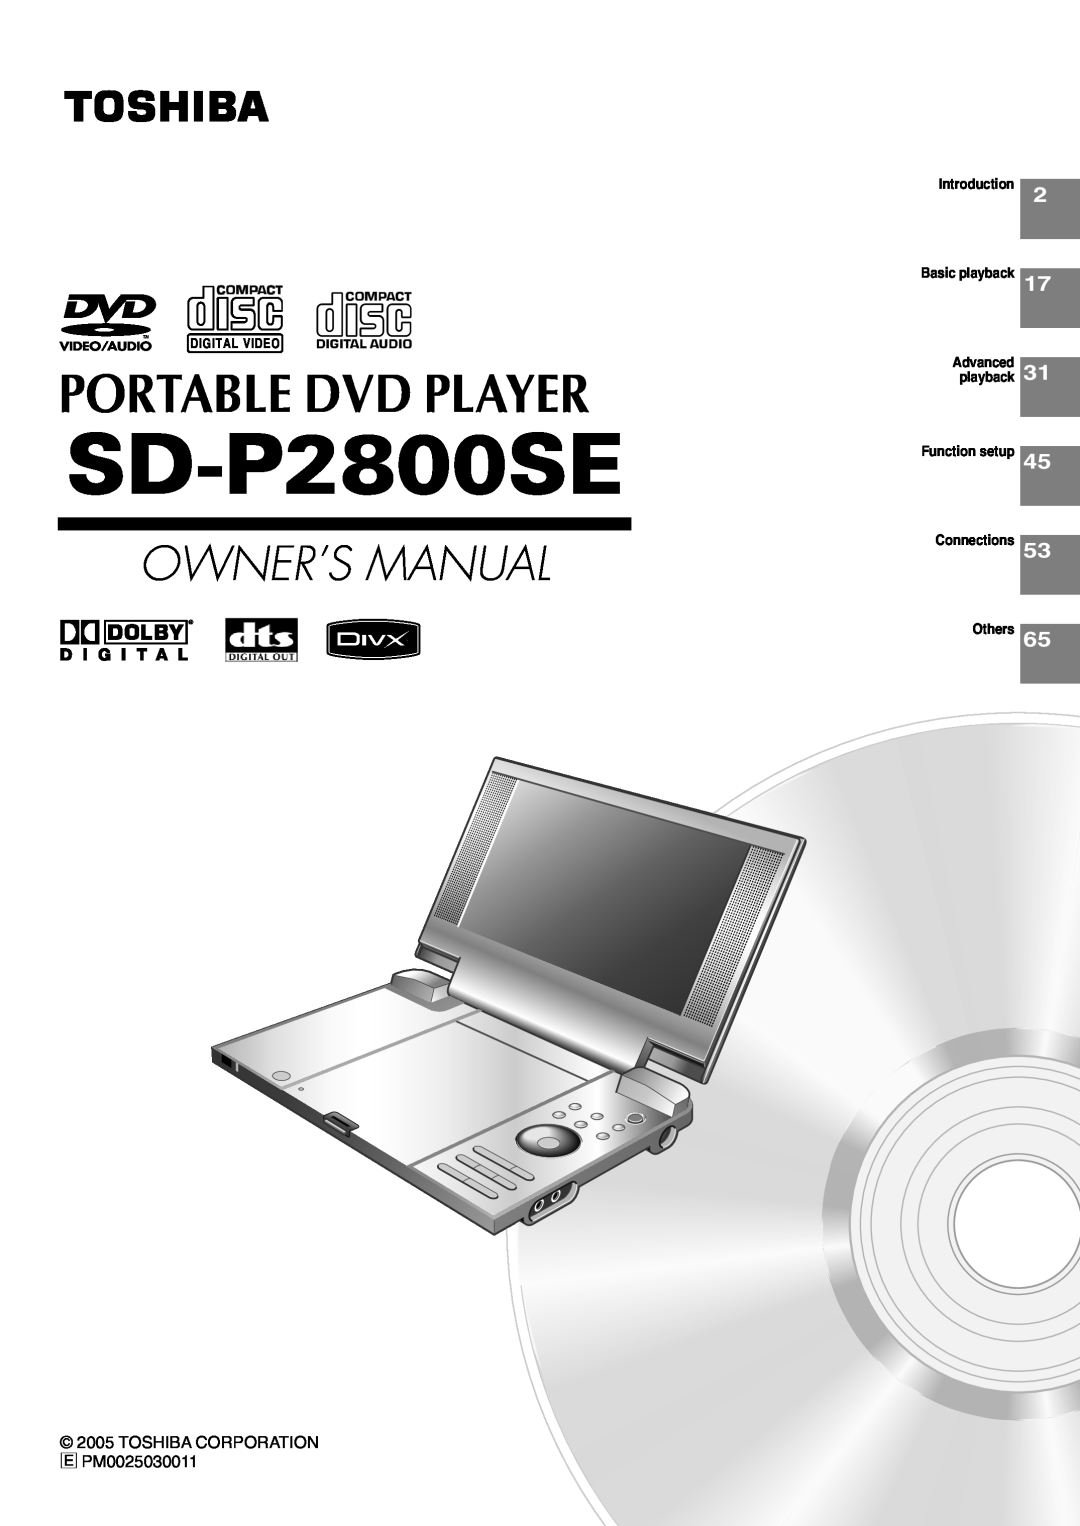 Toshiba SD-P2800SE owner manual Portable Dvd Player, Owner’S Manual, Introduction Basic playback DIGITAL VIDEO Advanced 